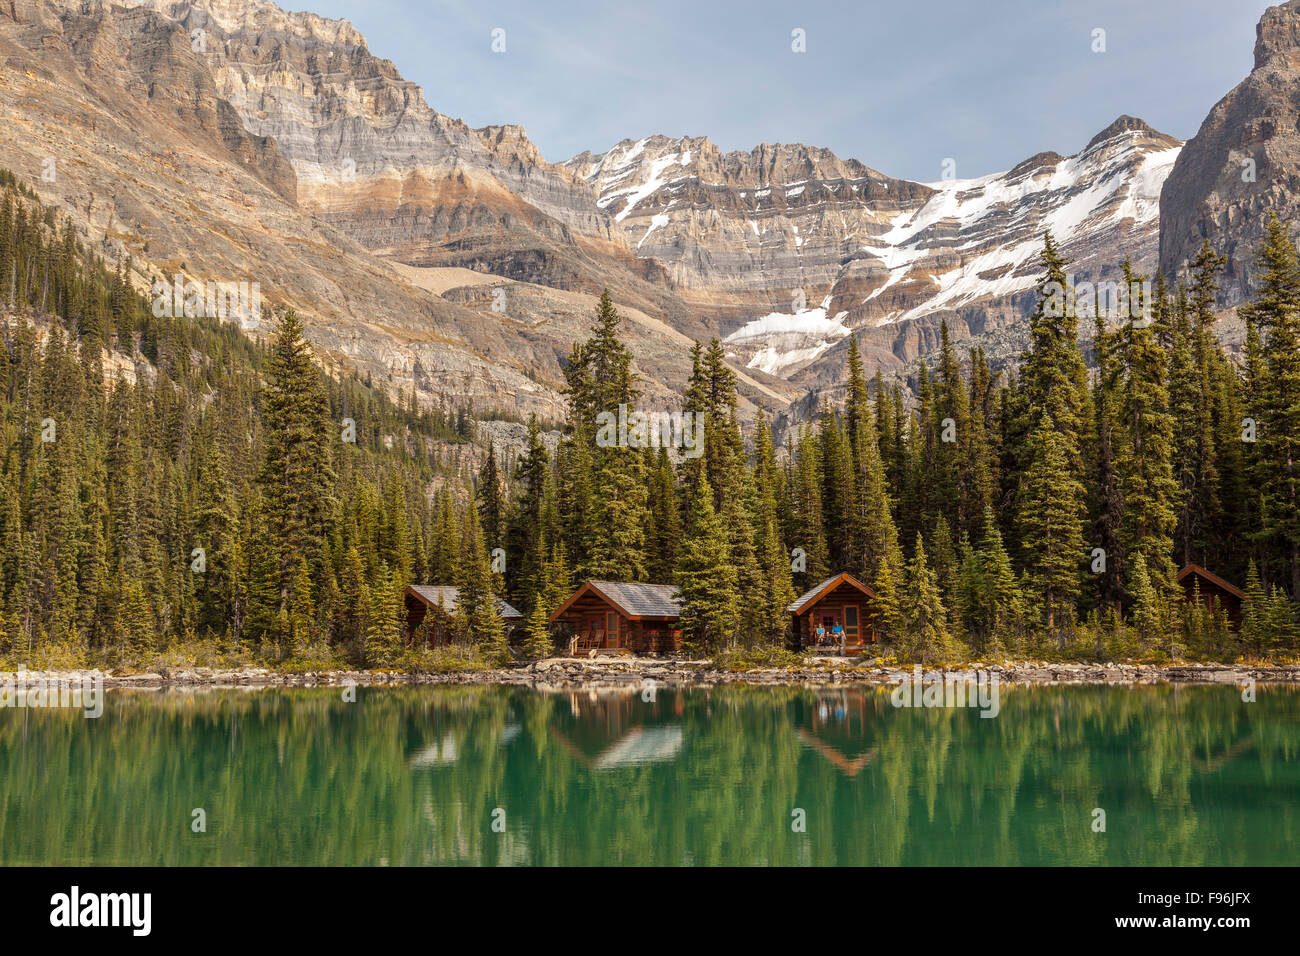 A couple relax on their cabin porch at Lake O'Hara, Yoho National Park, British Columbia, Canada. No Model Release Stock Photo